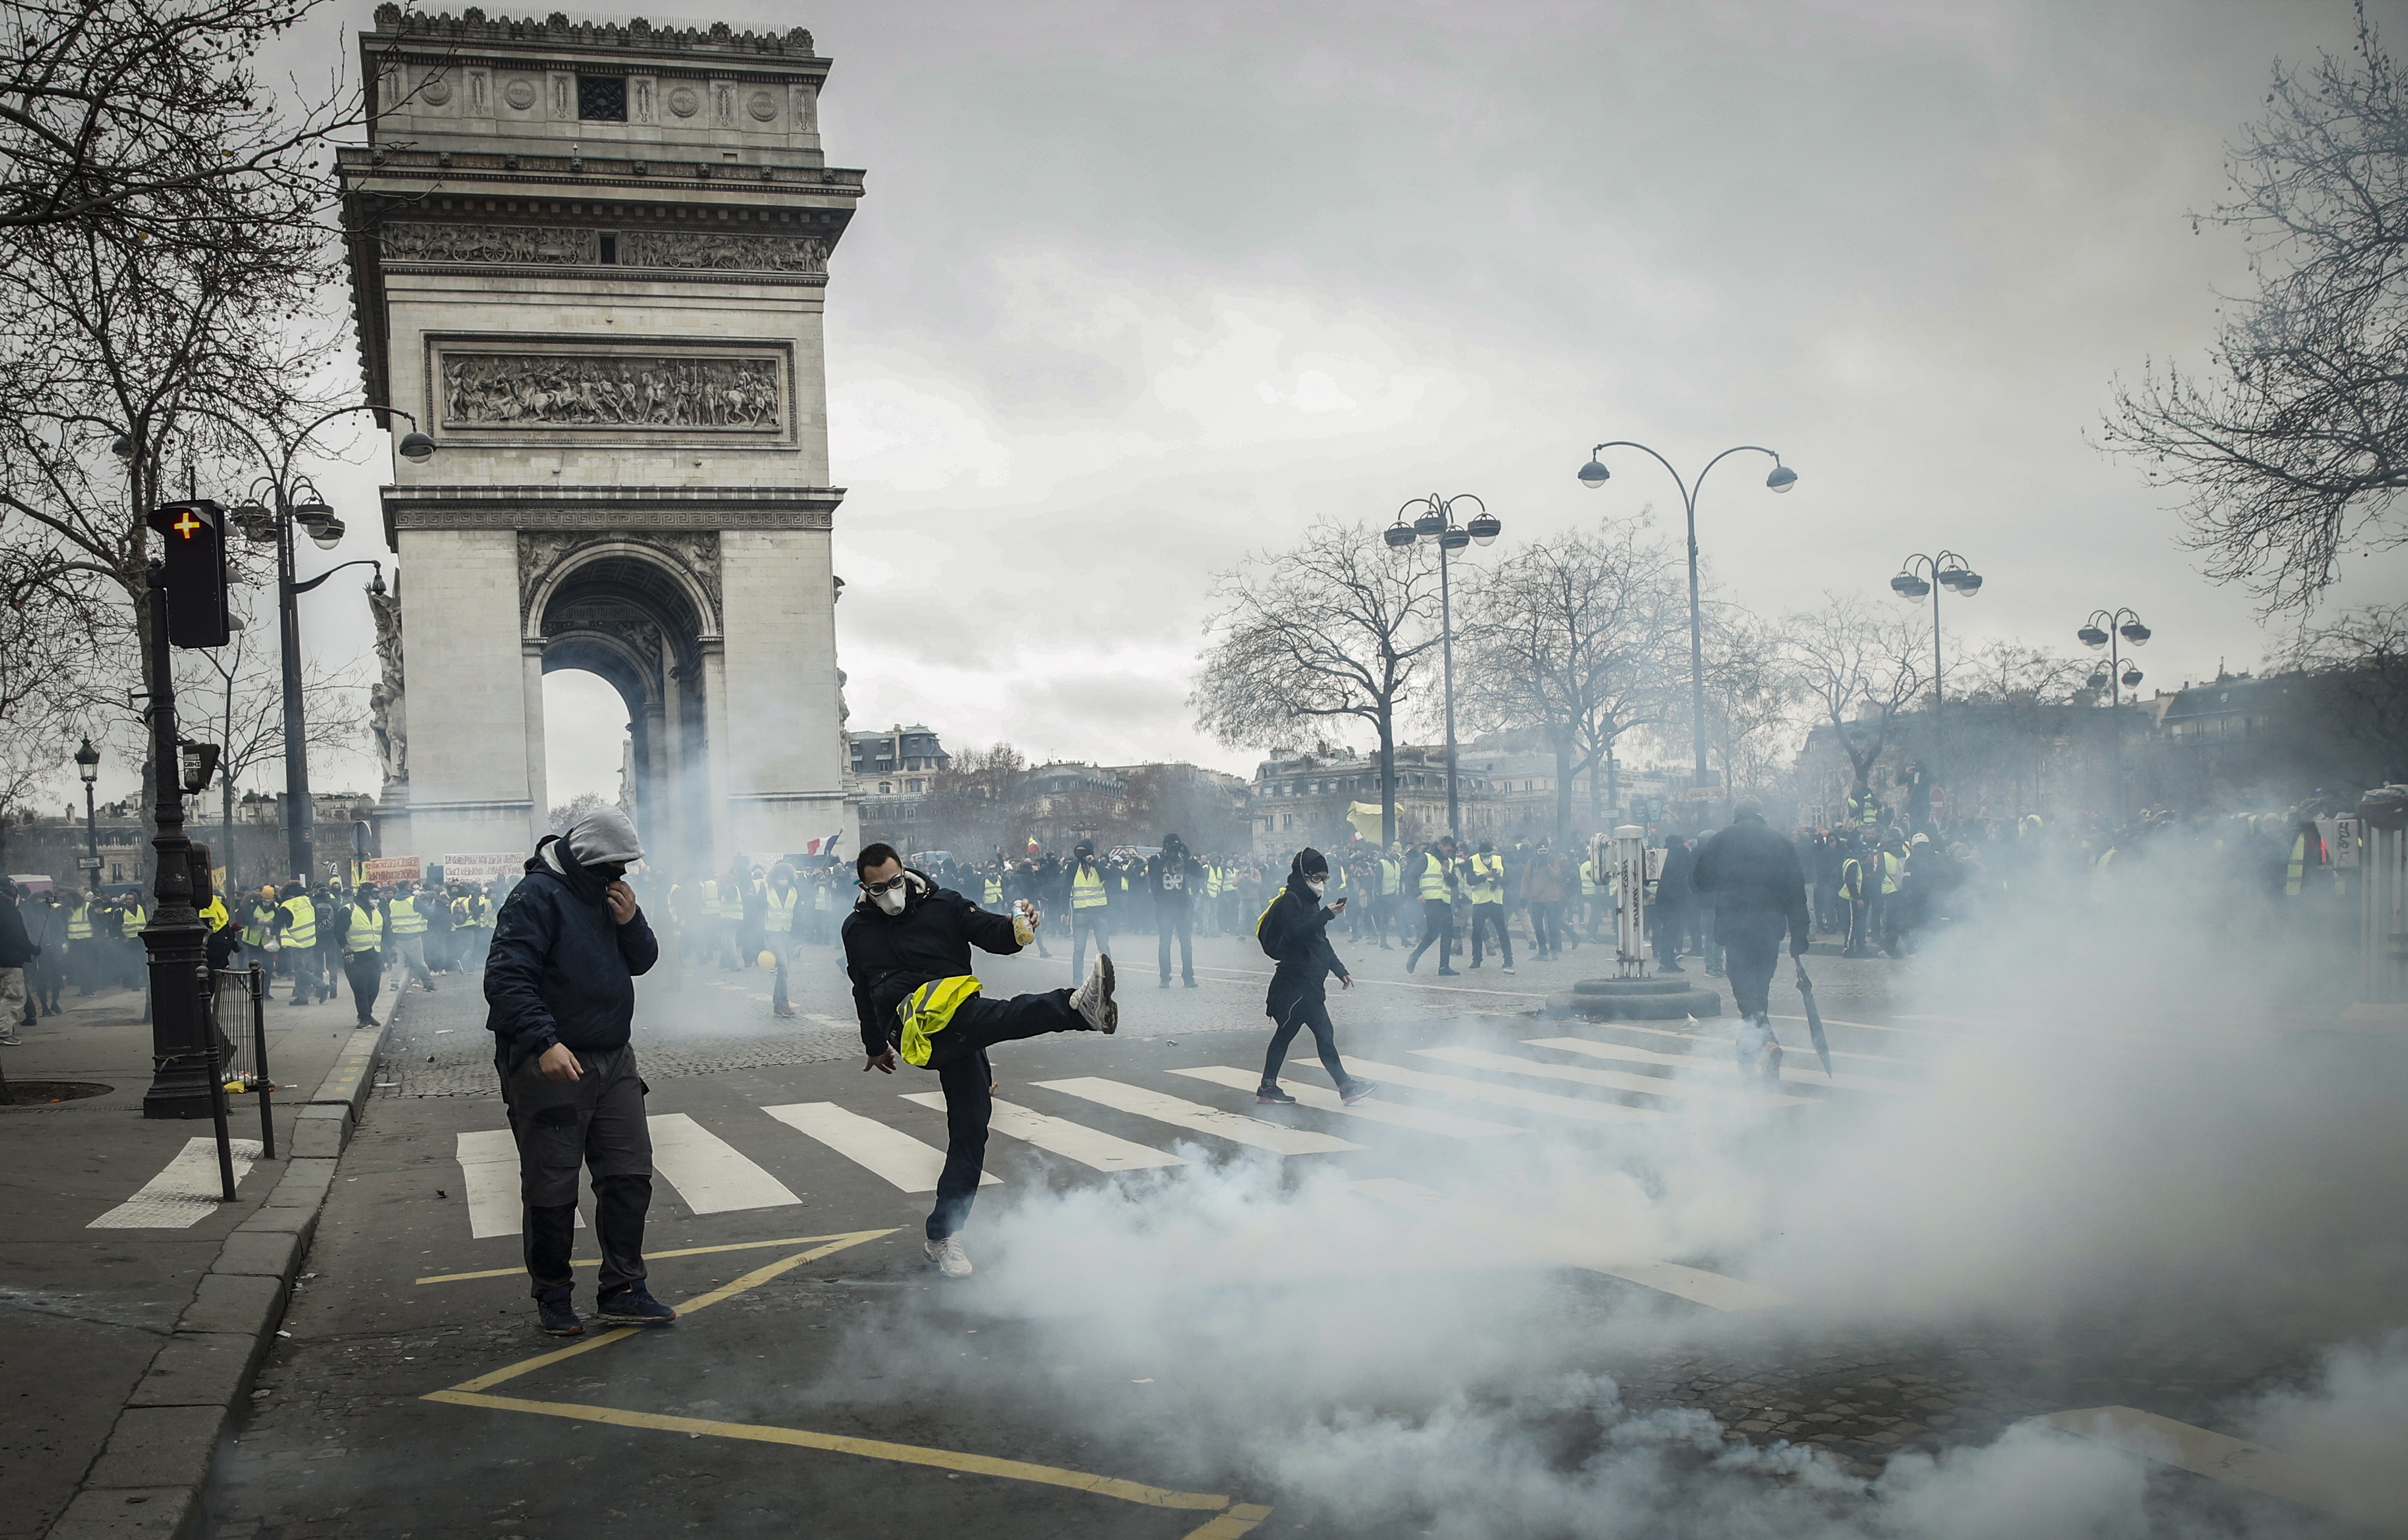 epa07277517 Tear gas engulfs the Place de l'Etoile, near the Arc de Triomphe, as protesters from the 'Gilets Jaunes' (Yellow Vests) movement take part in the 'Act IX' demonstration (the 9th consecutive national protest on a Saturday) in Paris, France, 12 January 2019. The so-called 'gilets jaunes' (yellow vests) is a grassroots protest movement with supporters from a wide span of the political spectrum, that originally started with protest across the nation in late 2018 against high fuel prices. The movement in the meantime also protests the French government's tax reforms, the increasing costs of living and some even call for the resignation of French President Emmanuel Macron.  EPA/YOAN VALAT